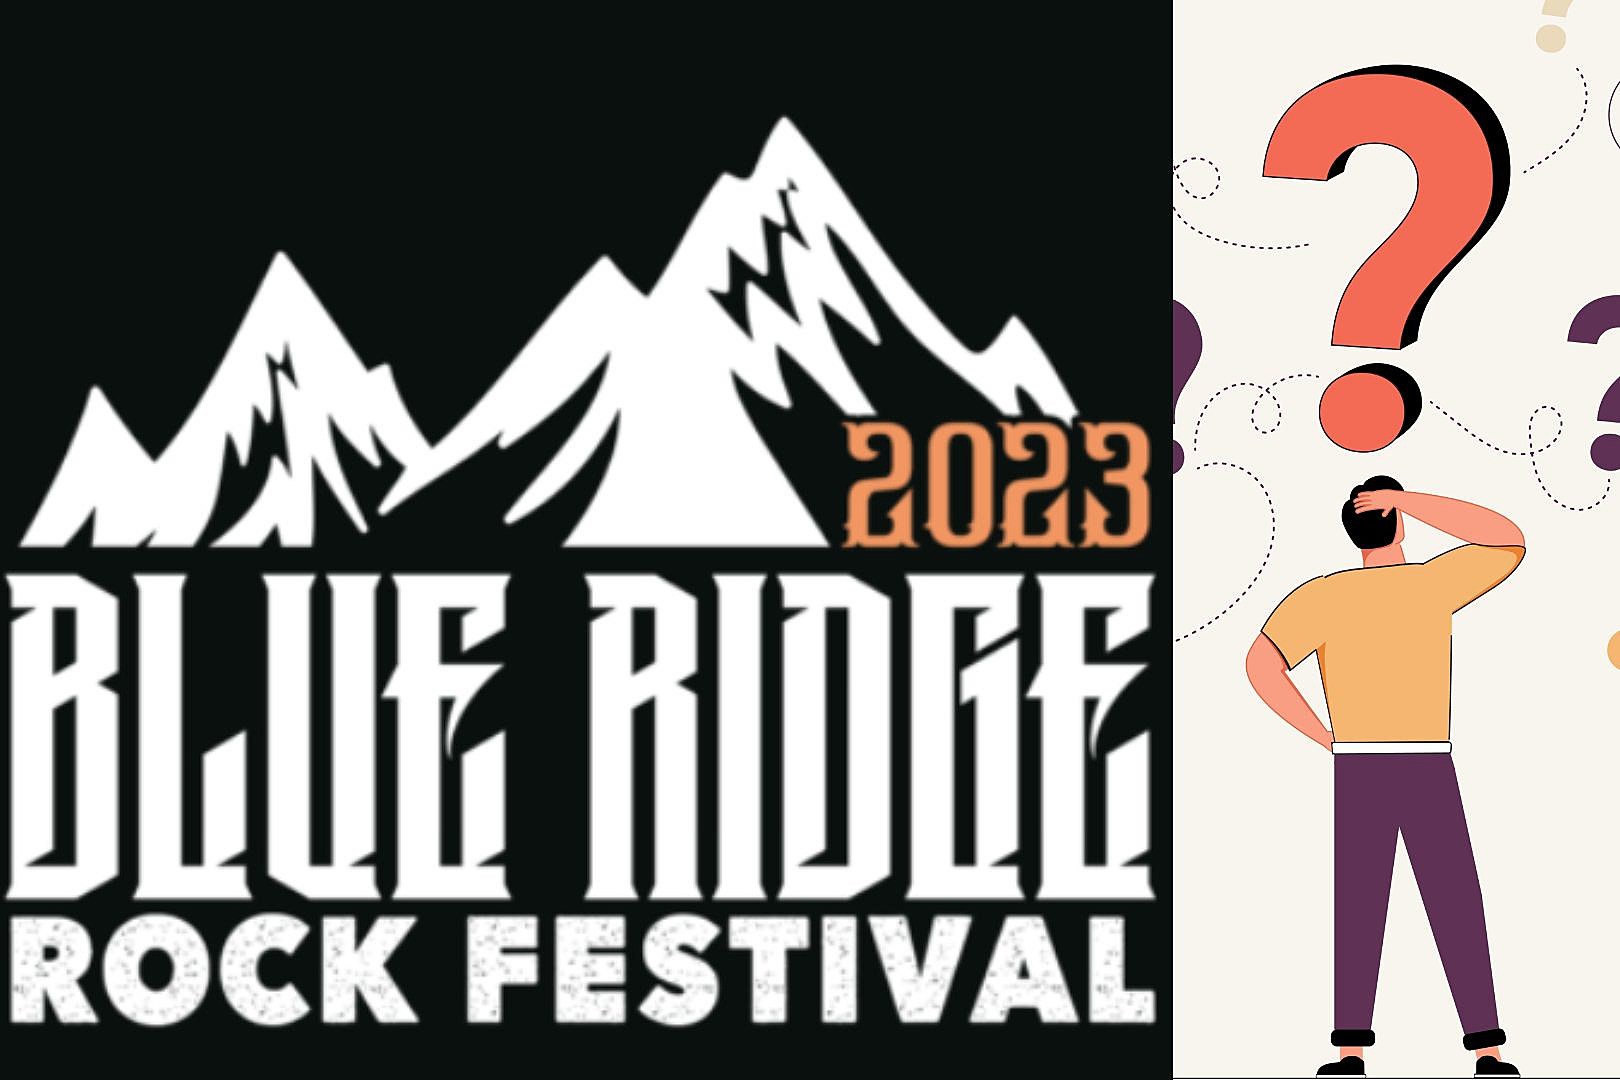 What's Going on With Blue Ridge Rock Fest? Venue Responds